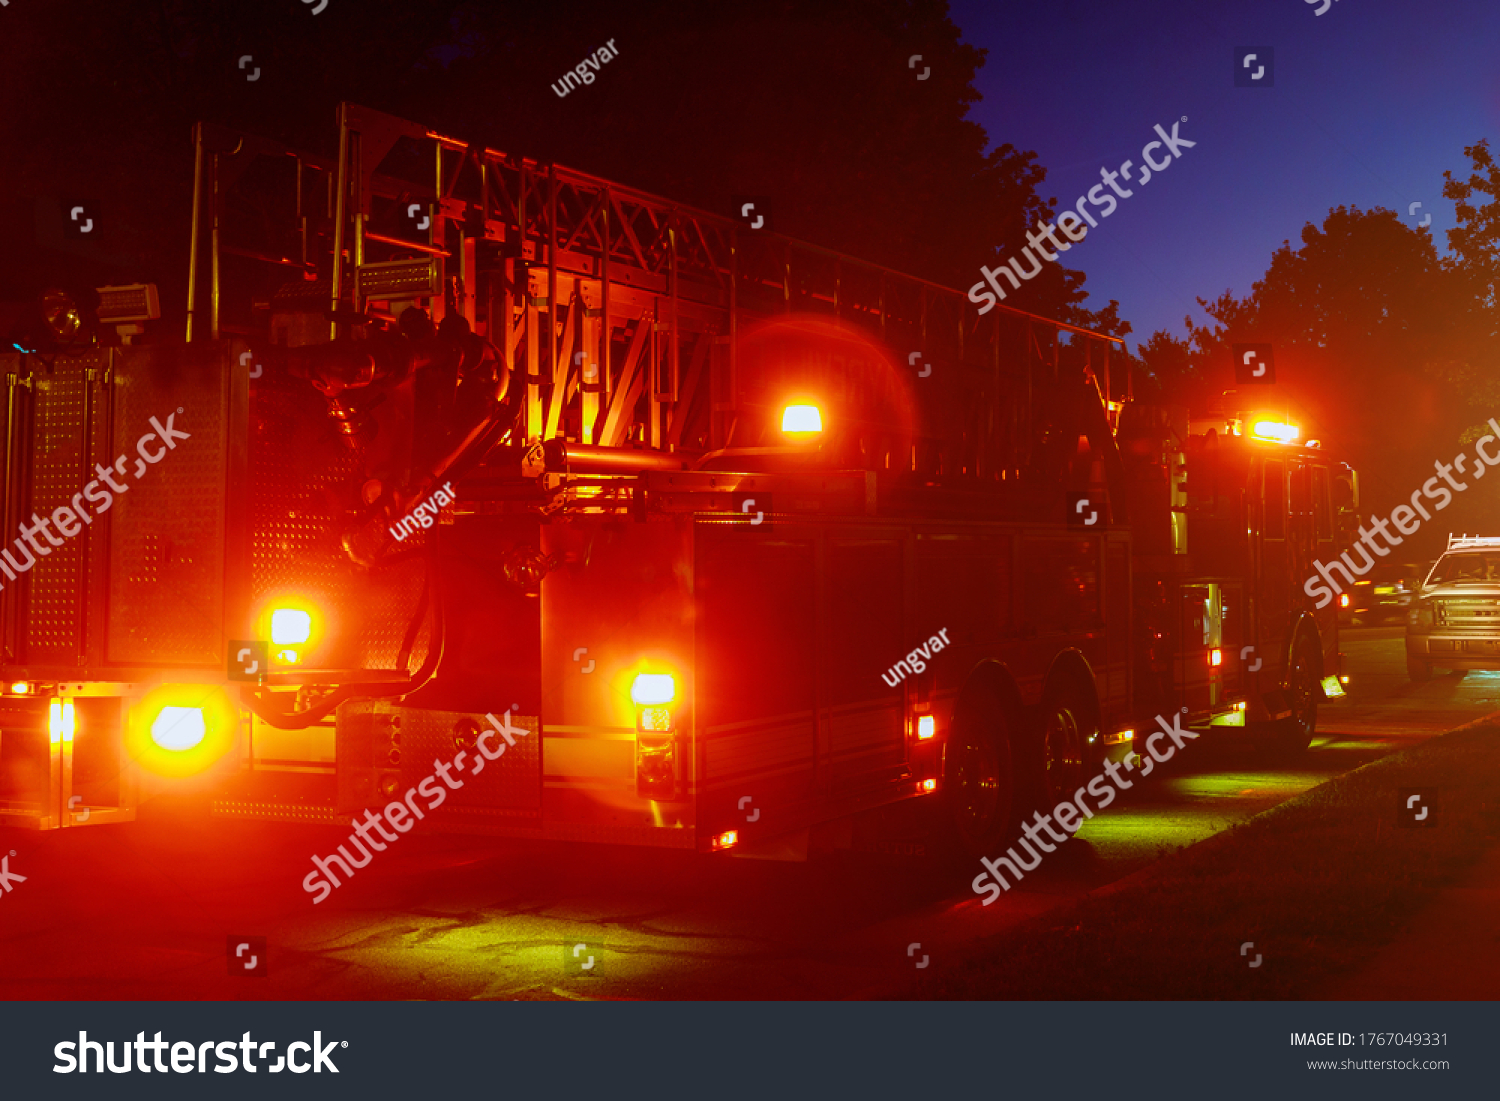 Fire truck with flashing red lights of a fire engine night time in dusk #1767049331